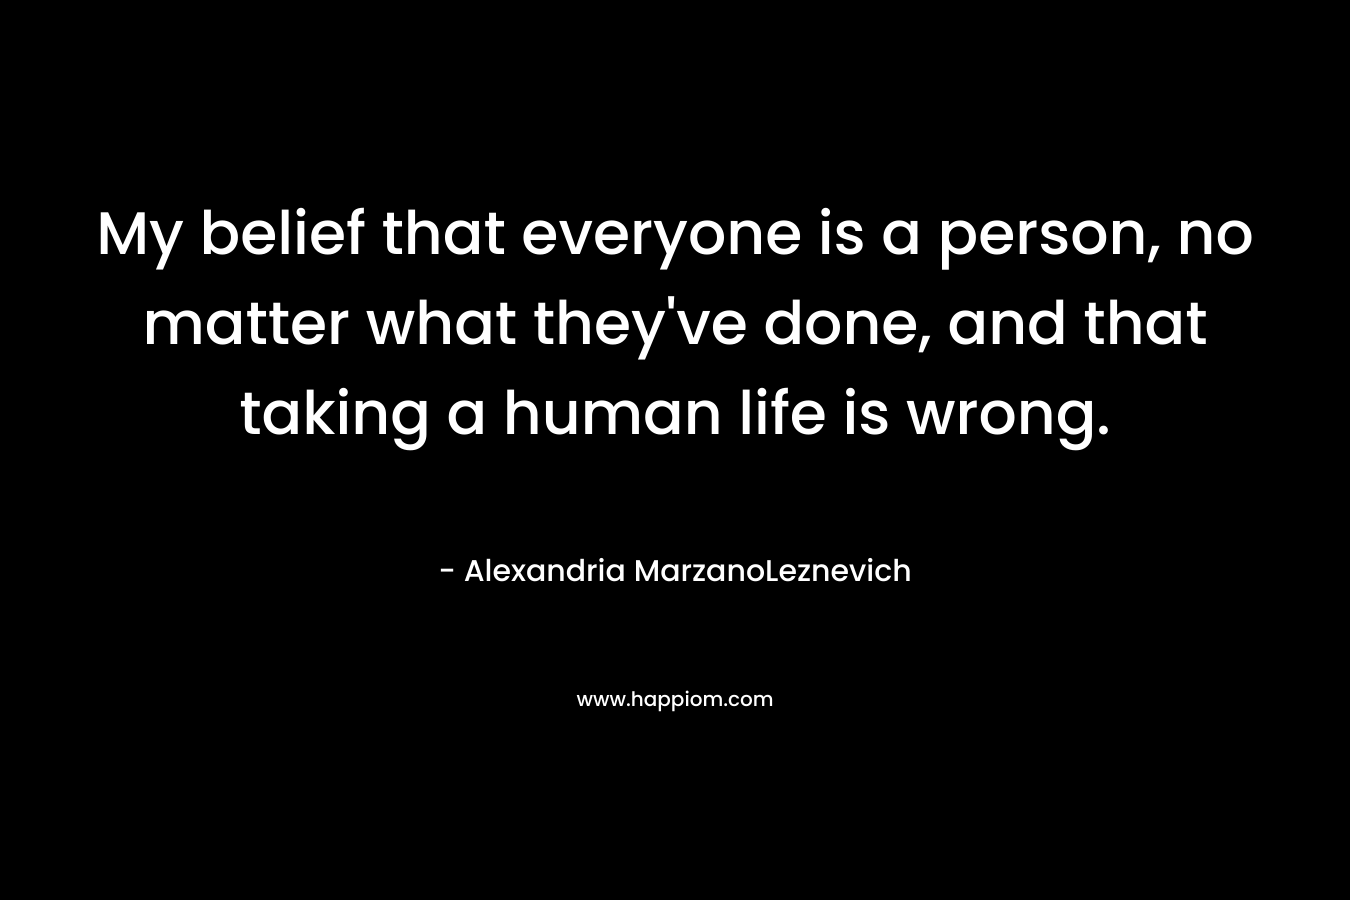 My belief that everyone is a person, no matter what they've done, and that taking a human life is wrong.